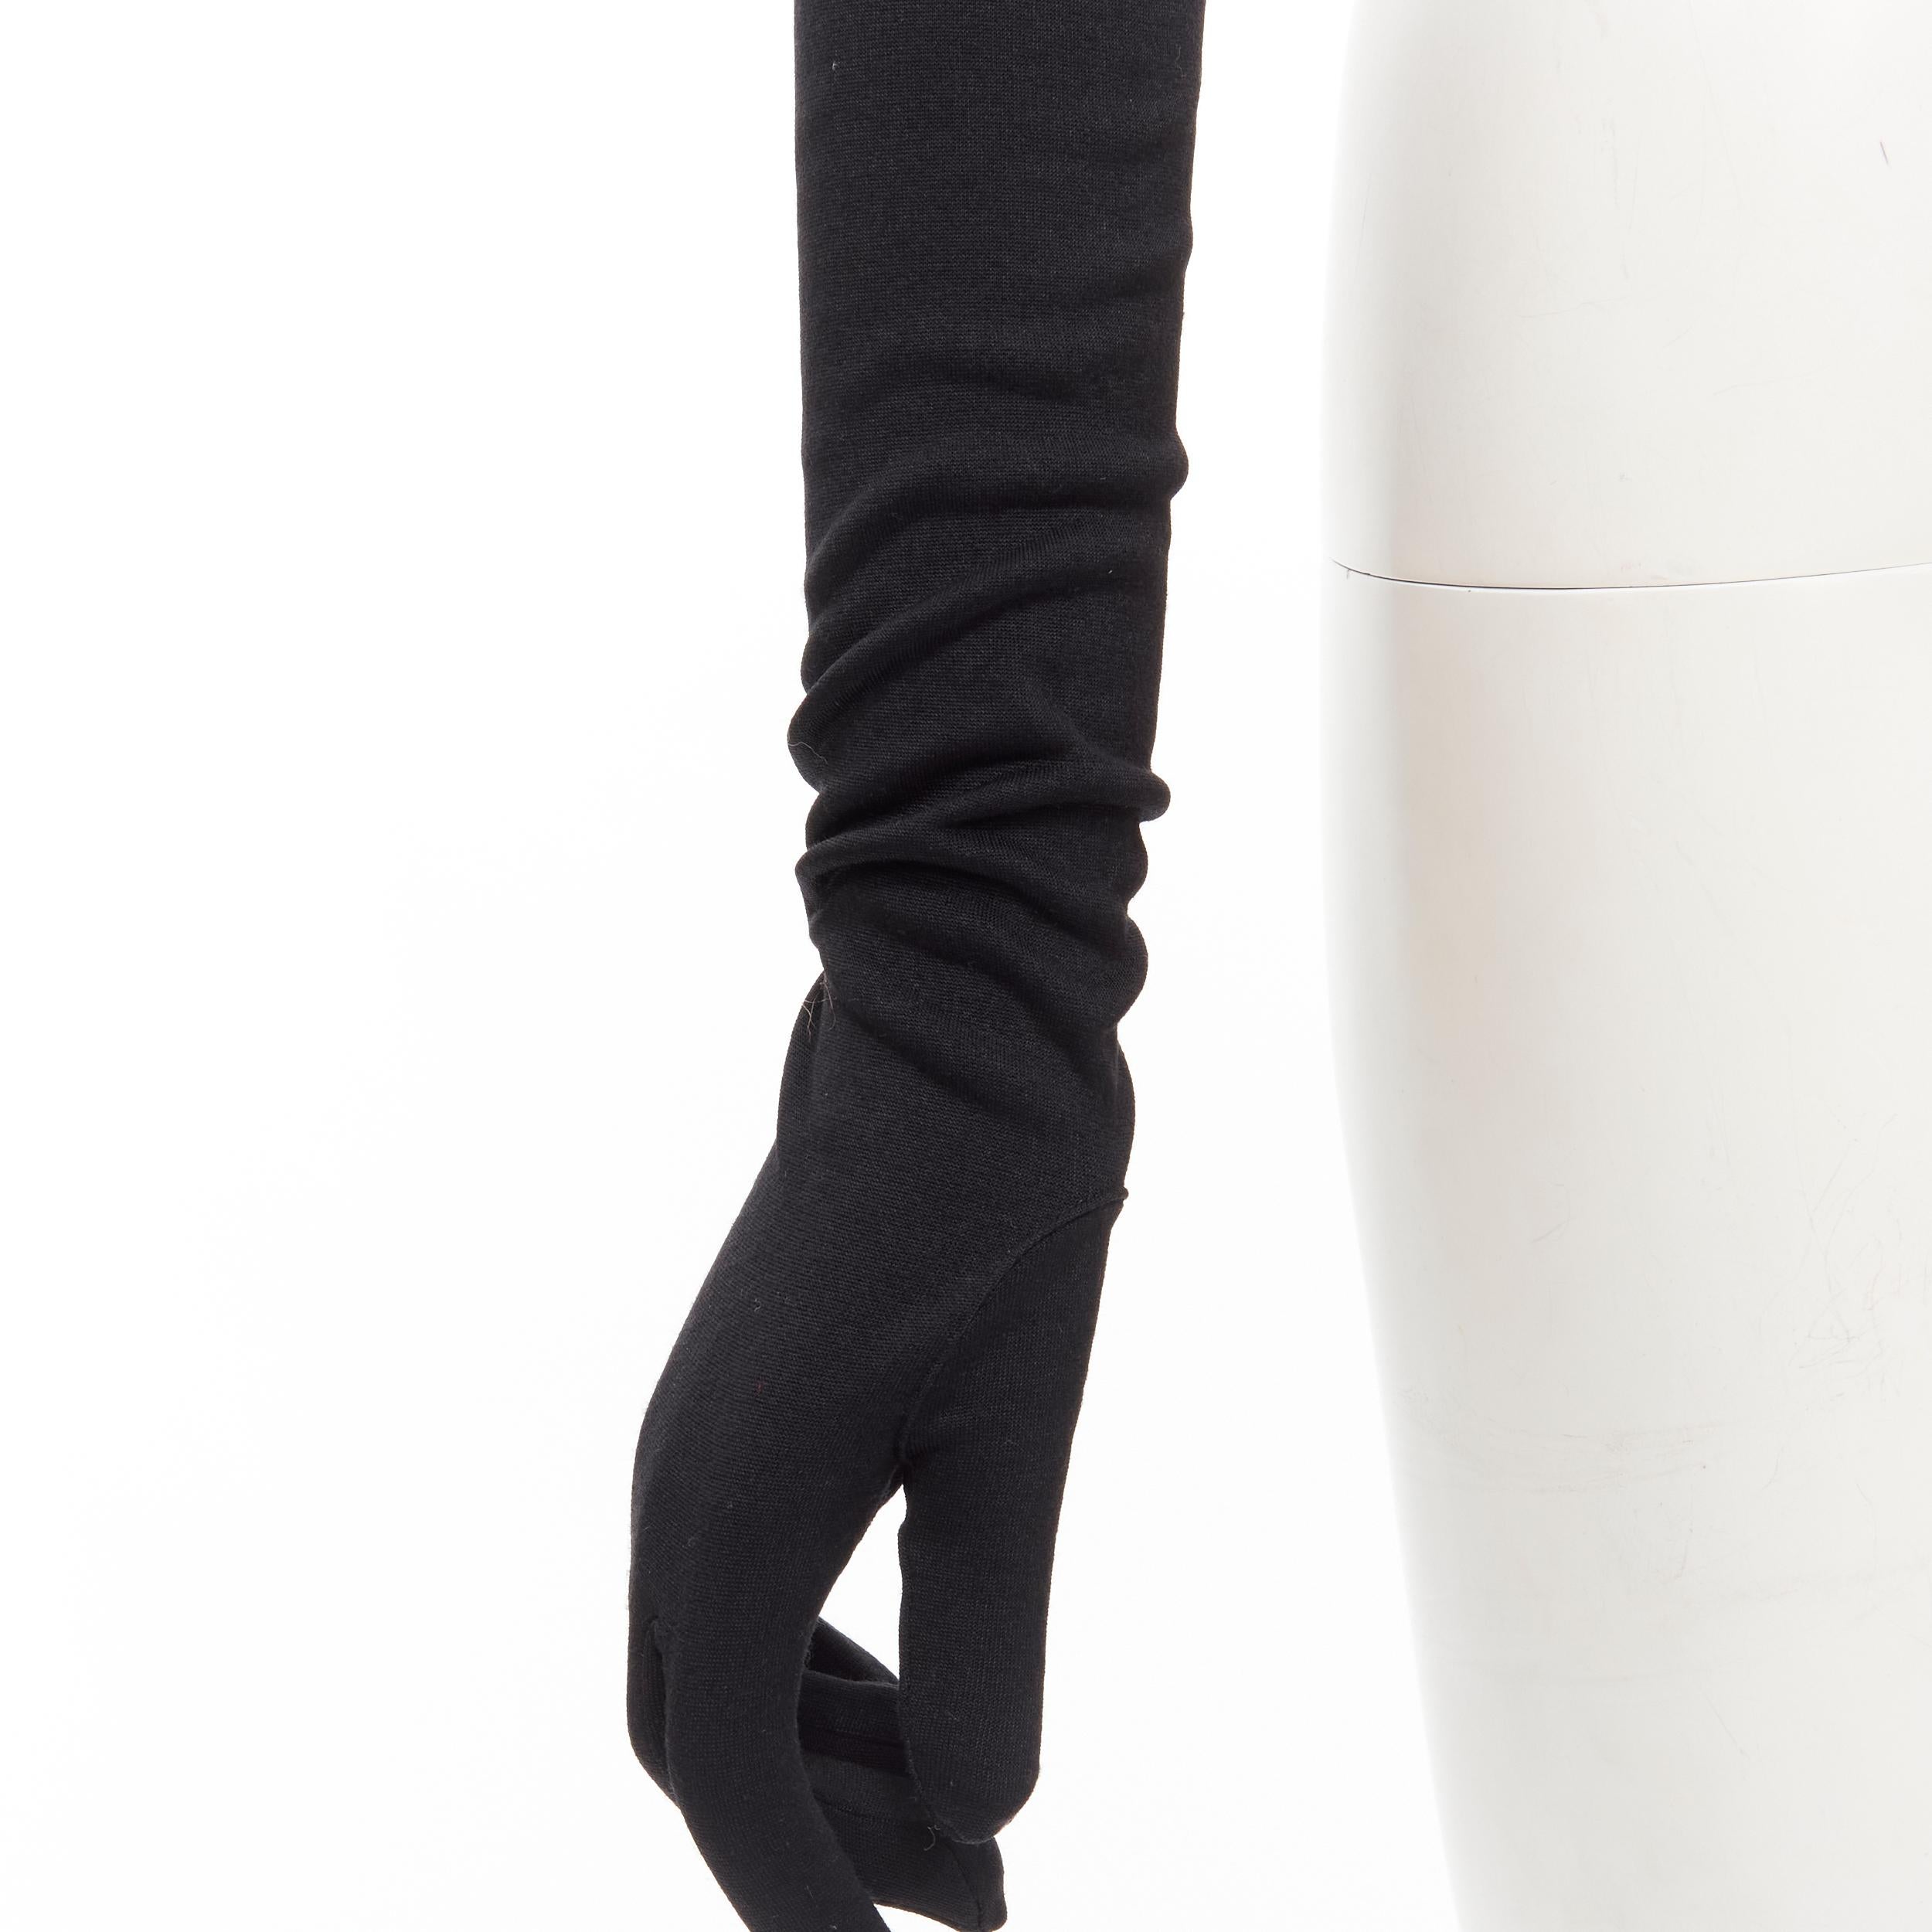 COMME DES GARCONS 1980's Vintage black velvet lined cotton opera glove 
Reference: CRTI/A00657 
Brand: Comme Des Garcons 
Designer: Rei Kawakubo 
Collection: 1980s 
Material: Cotton 
Color: Black 
Pattern: Solid 
Extra Detail: Classic opera gloves